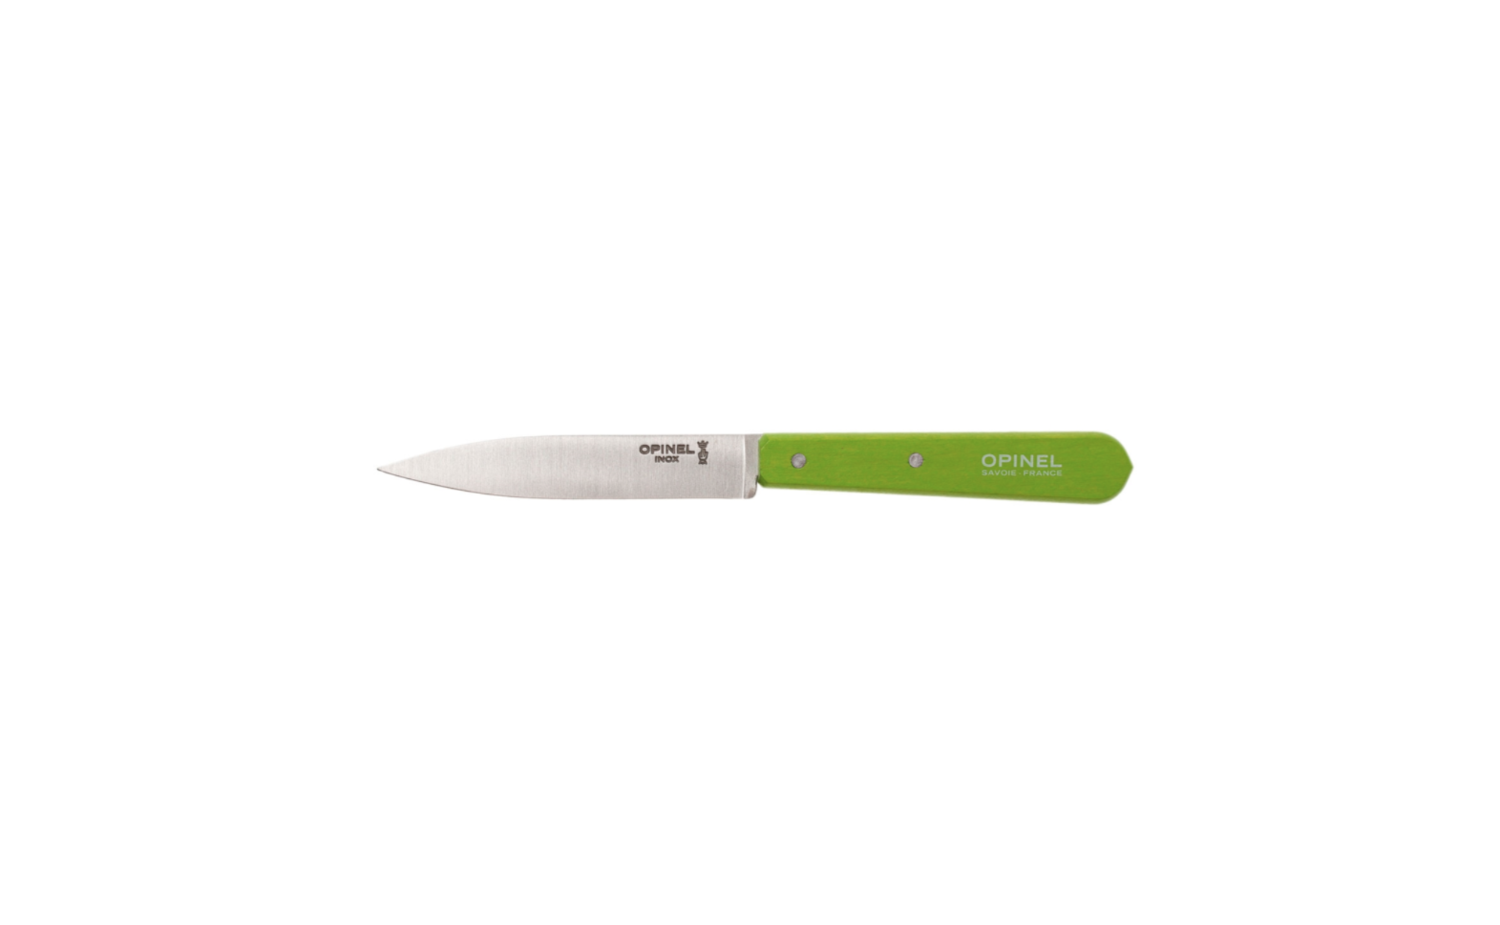 OPINEL 112 COUTEAU D'OFFICE NATURE INOX HOOD COUPE DECOUPE CUISINE 3123840019159 HOME COOKING KITCHEN NATURE INOX HOOD COMASOUND KARTEL CSK ONLINE